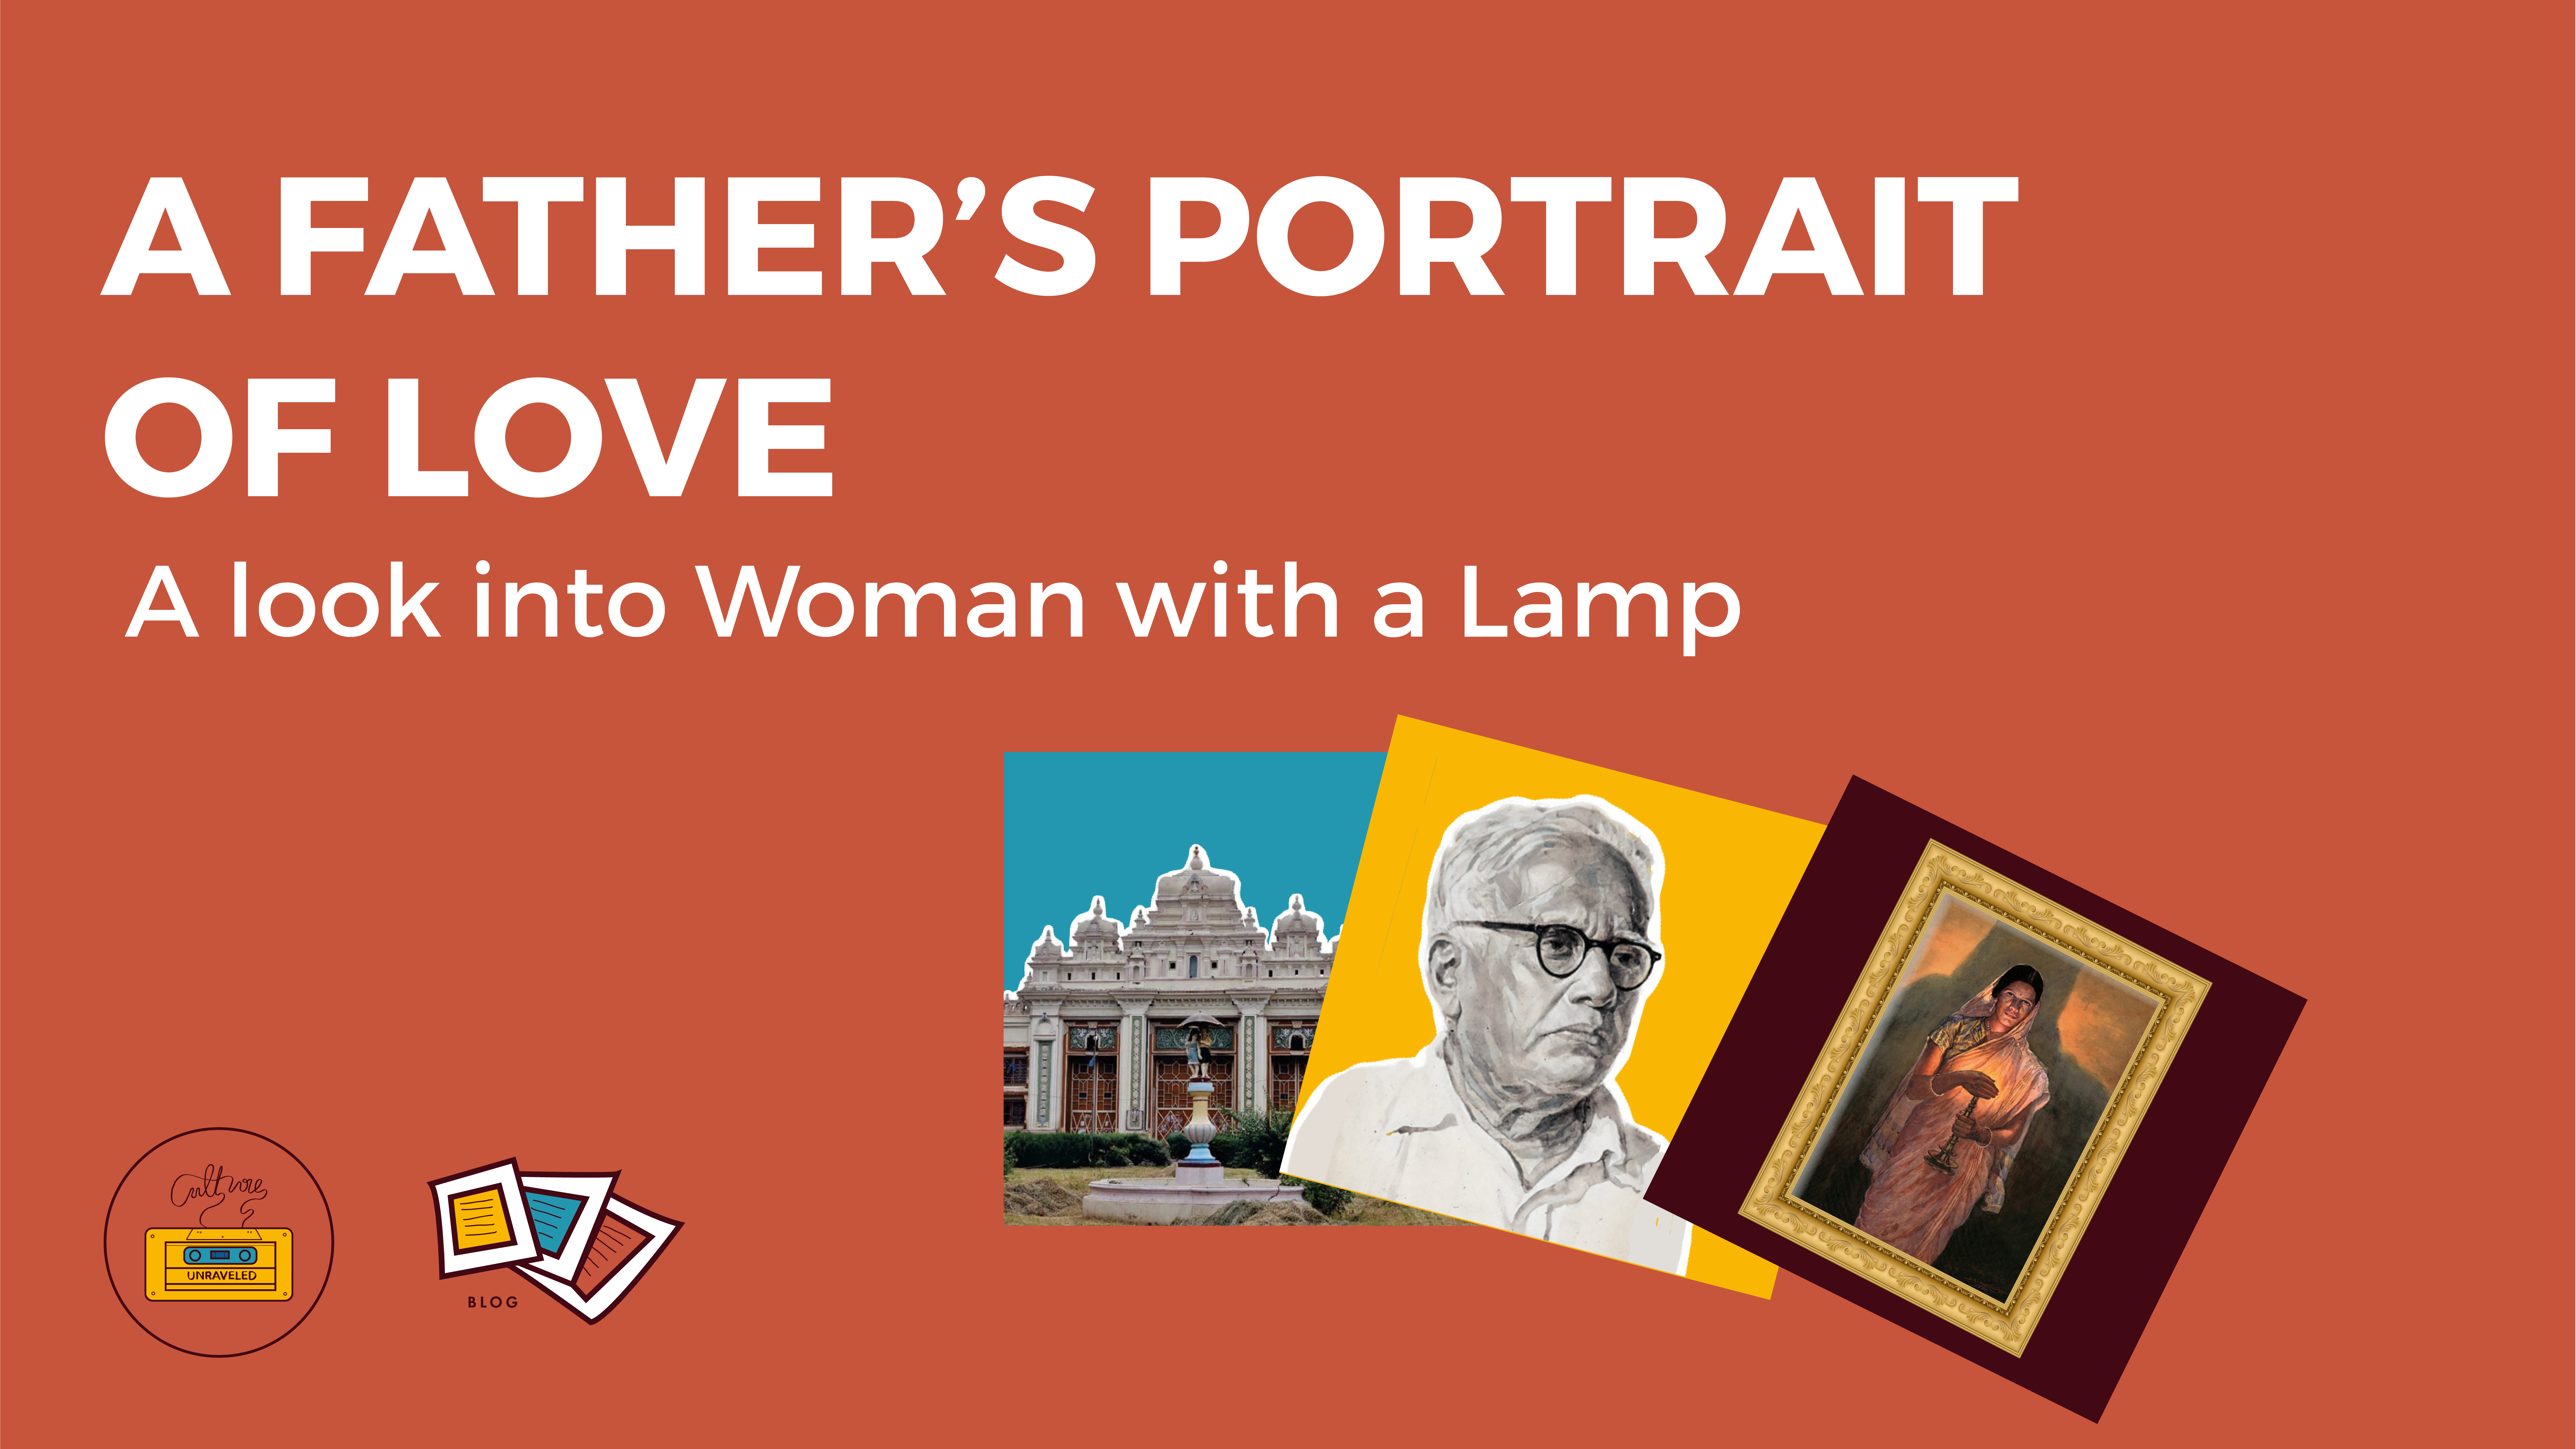 A Father’s Portrait of Love. A look into Woman with a Lamp